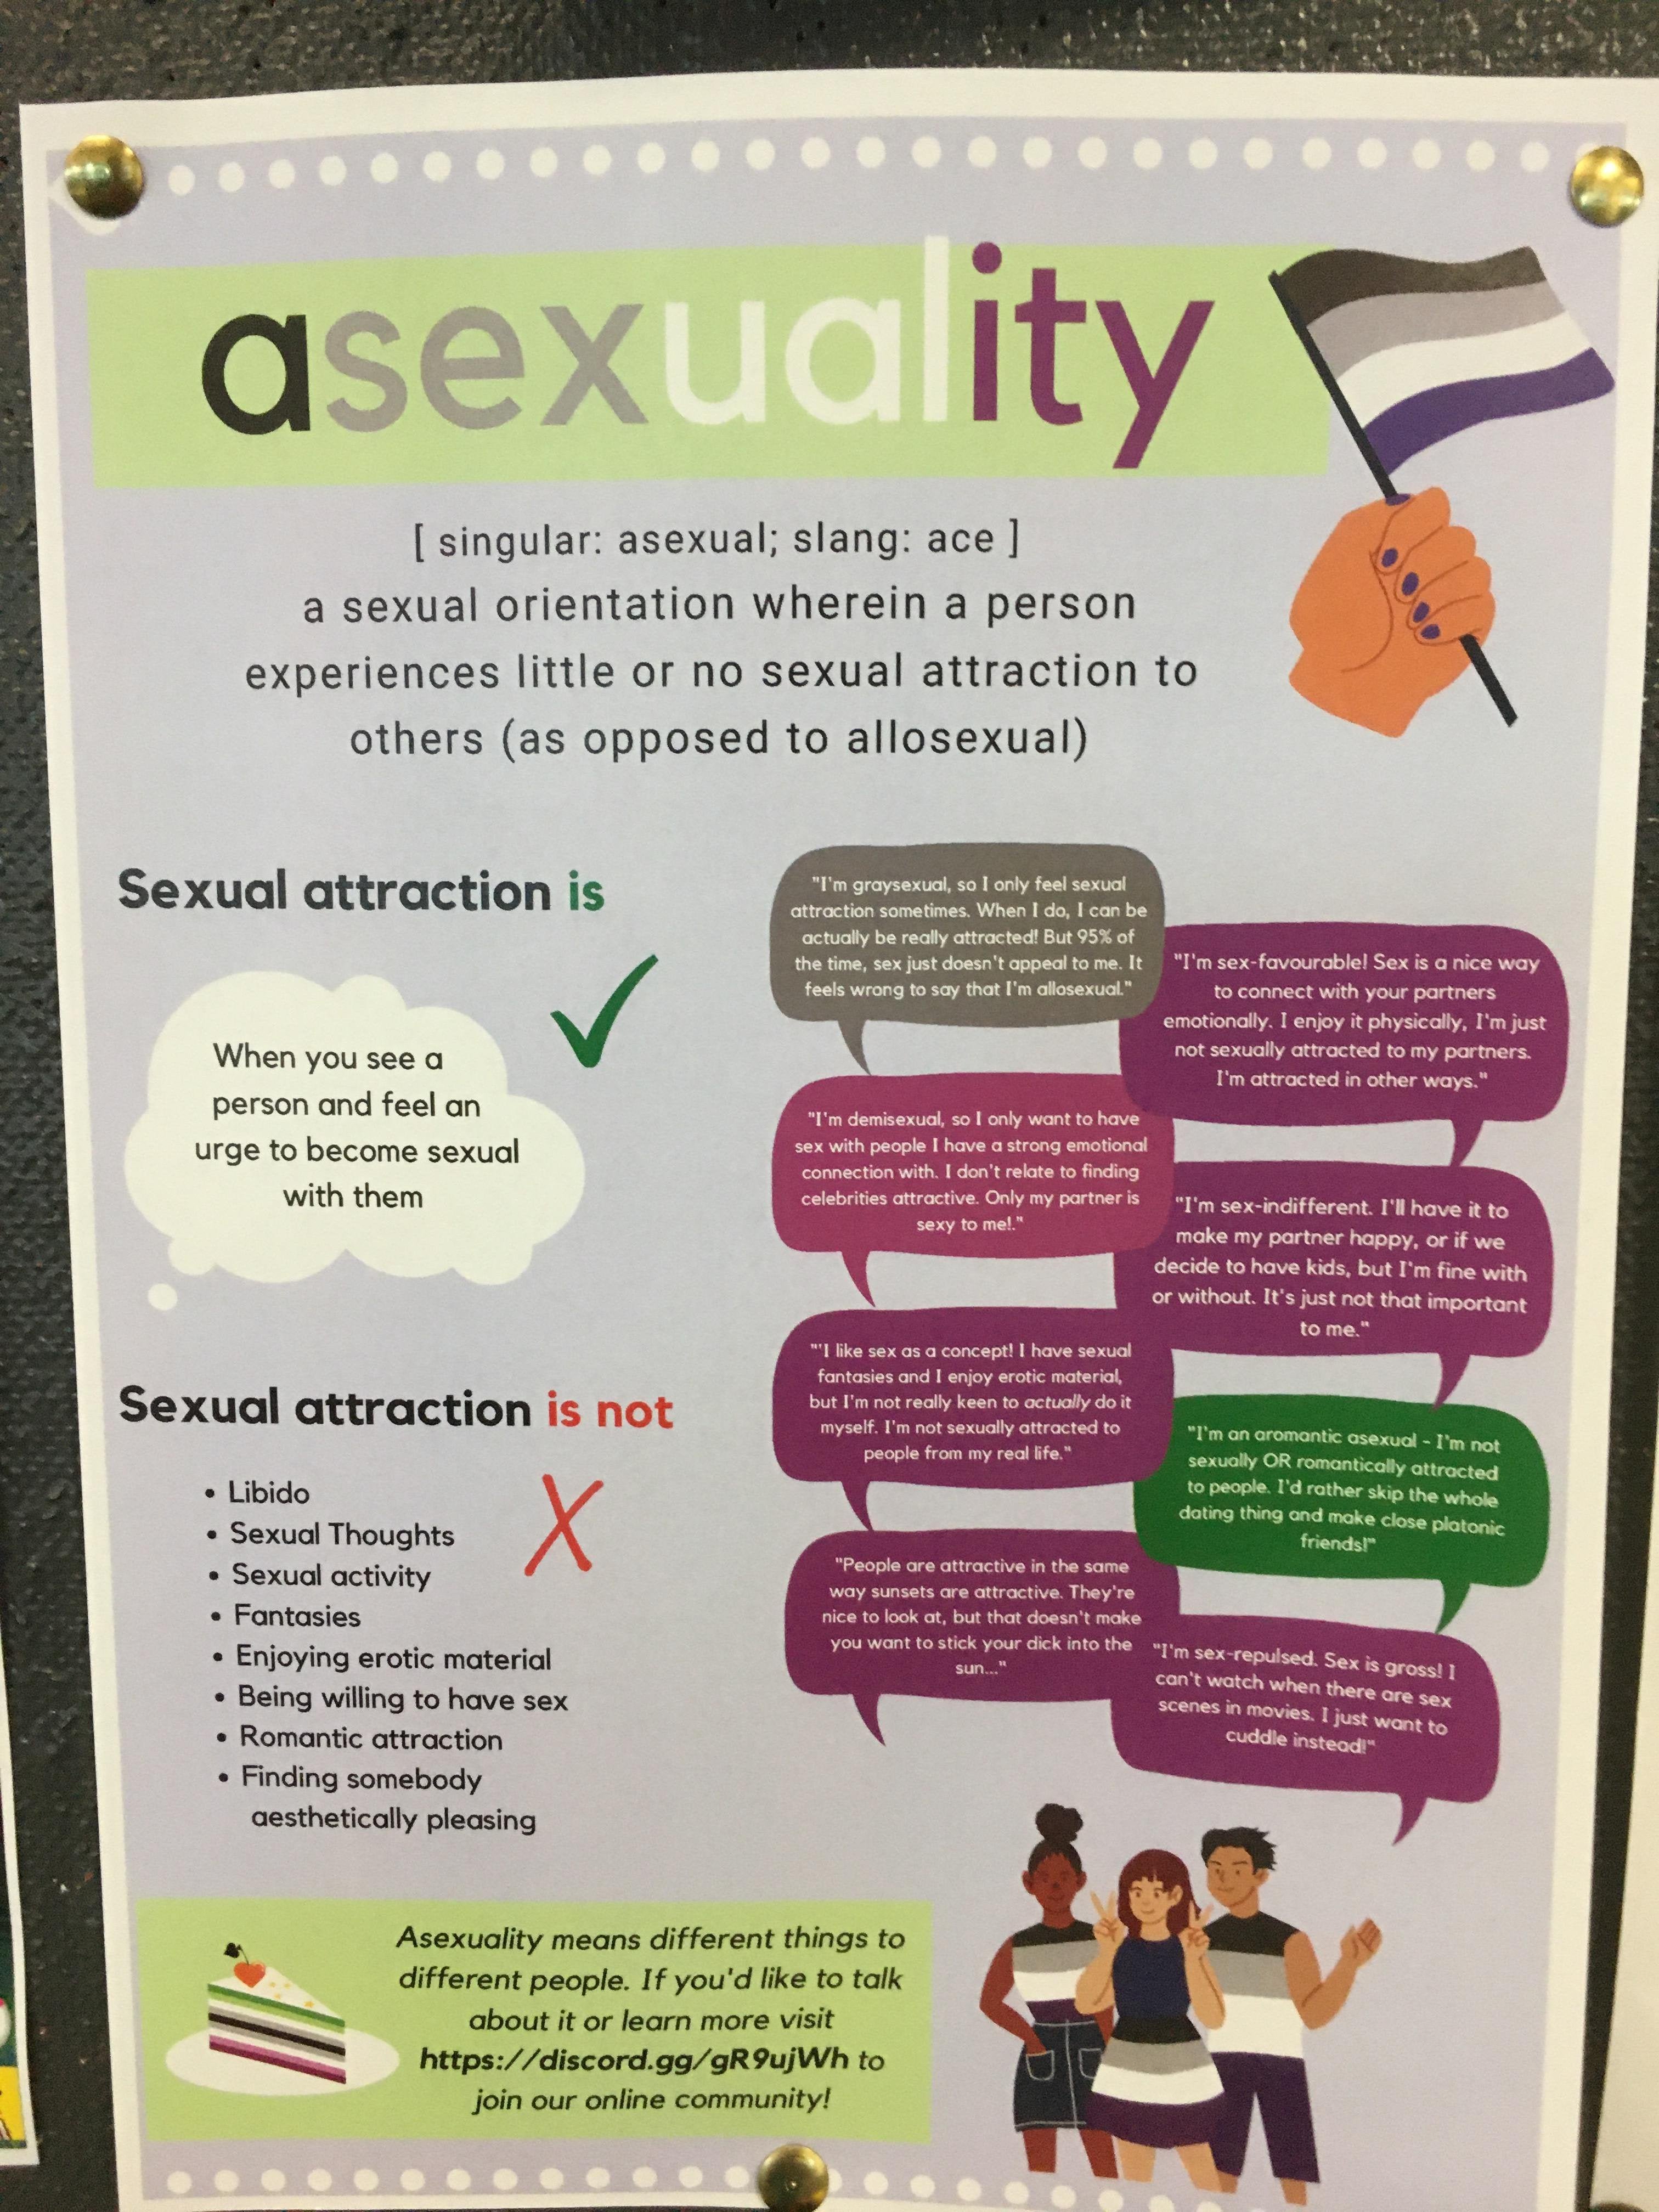 Another Asexuality Is A Spectrum1 There Are Many Types Of Attractions1 Poster Ever 